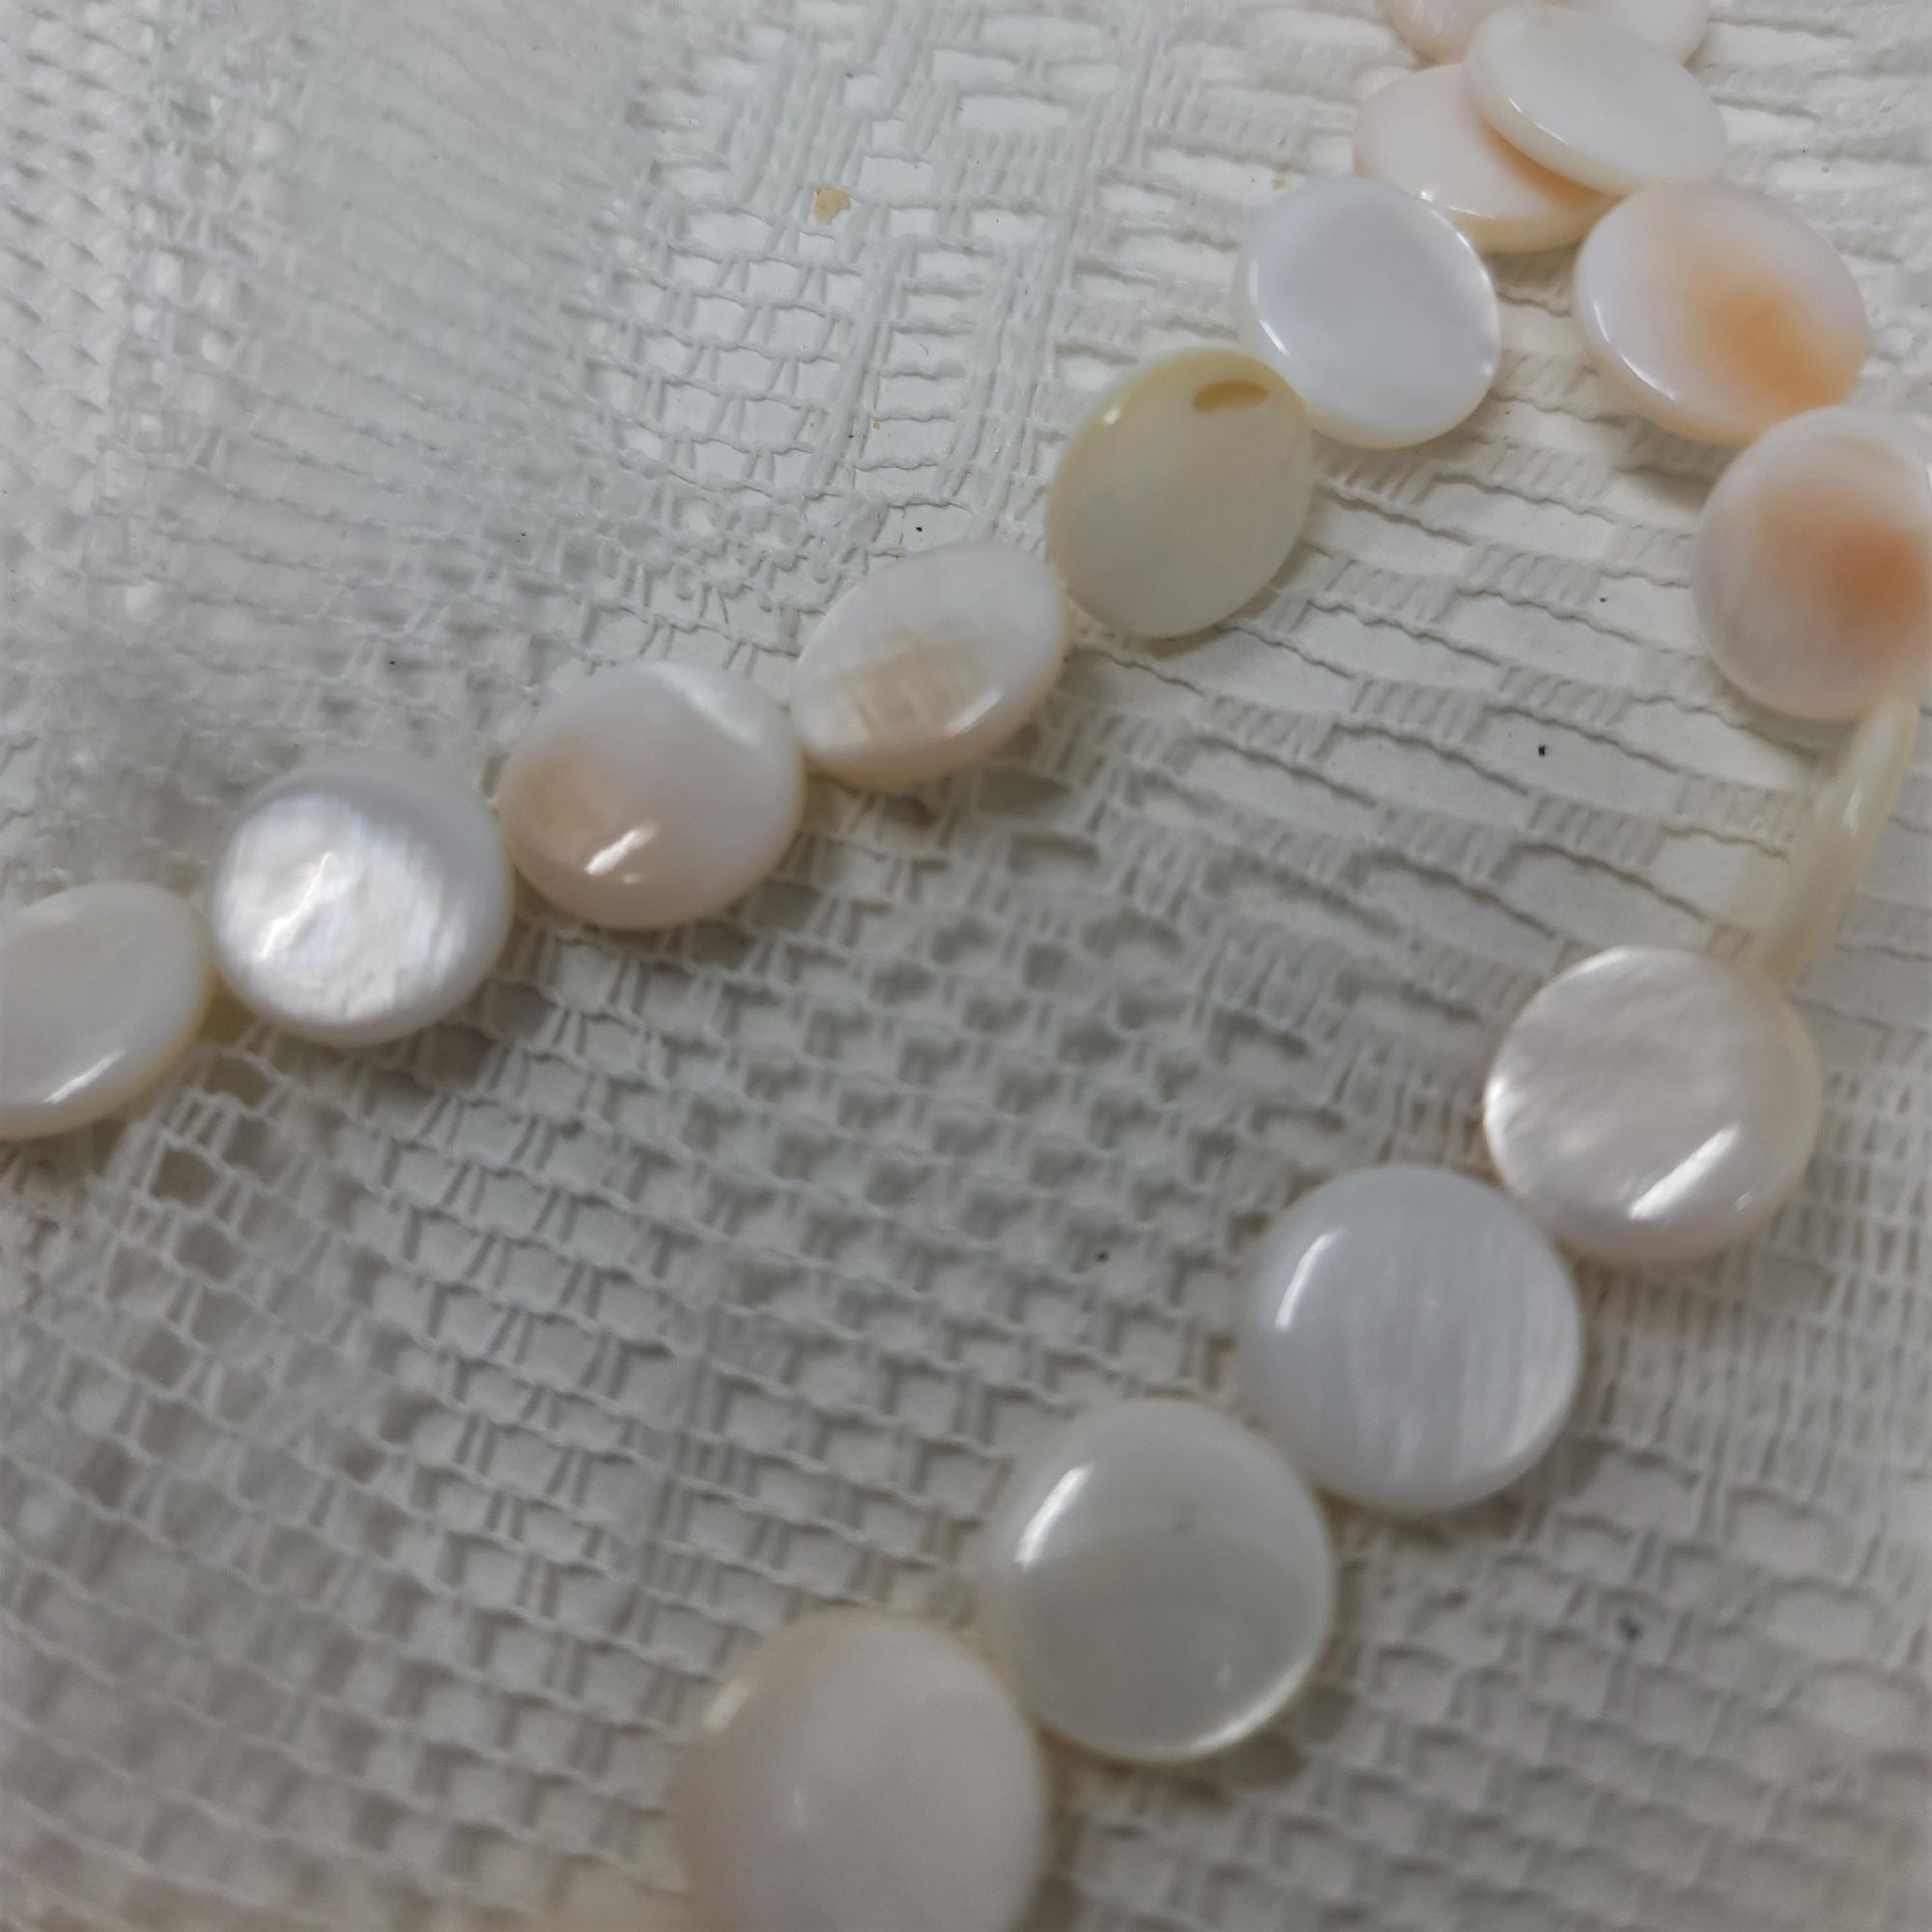 Genuine Mother of Pearl Coin Beads 16" MOP Beads